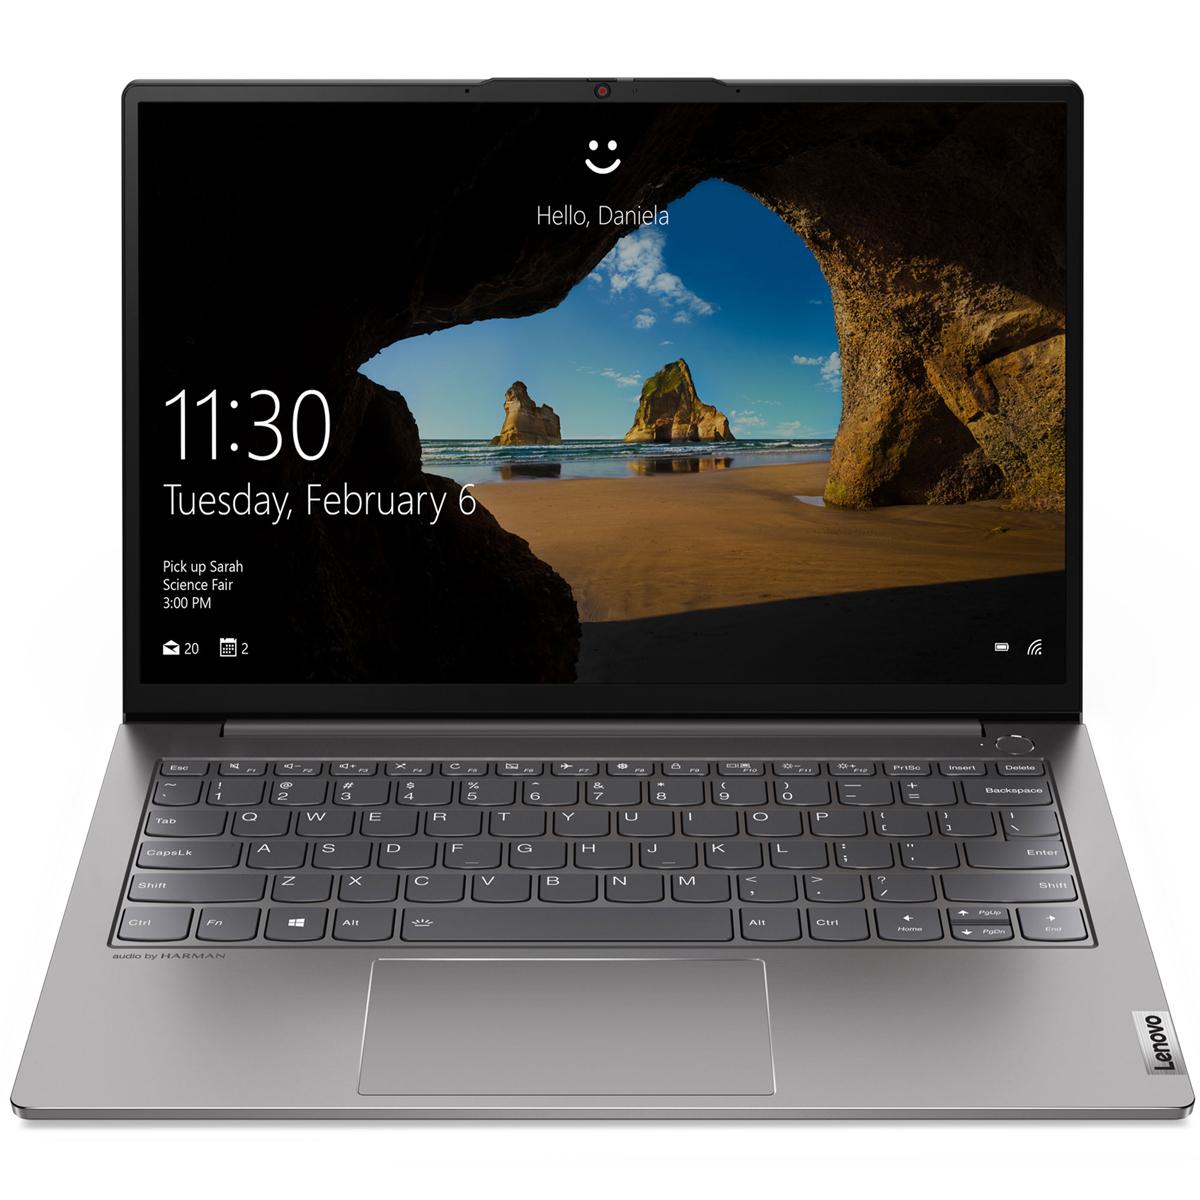 Lenovo ThinkBook 13s Gen 2 i7 16GB 512GB Notebook Laptop for $804.99 Shipped